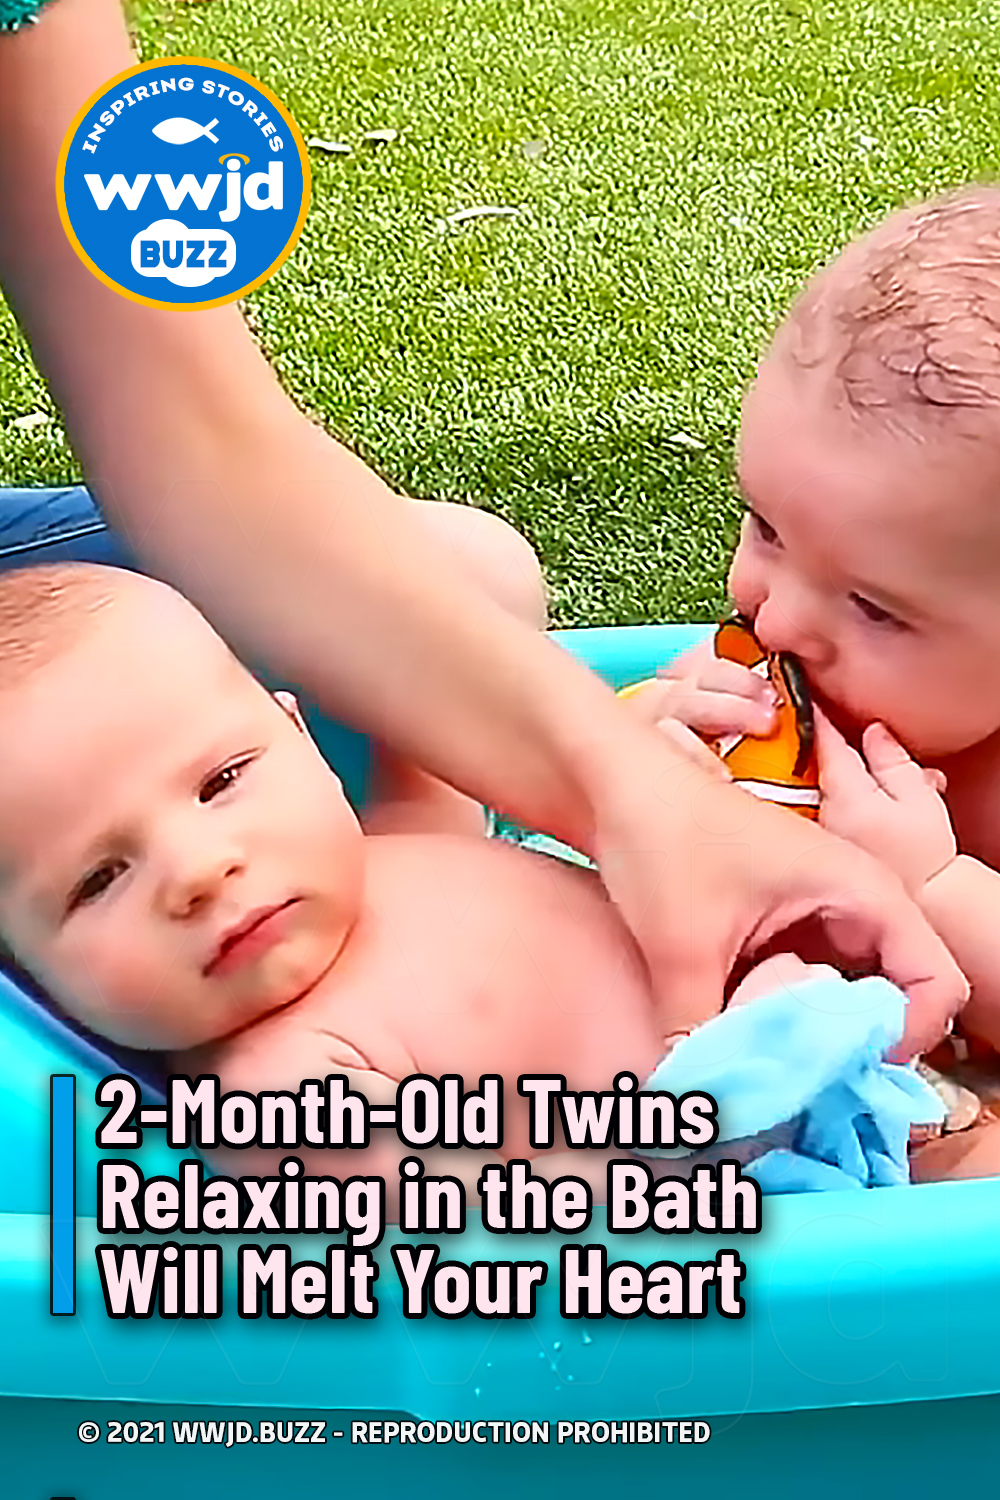 2-Month-Old Twins Relaxing in the Bath Will Melt Your Heart